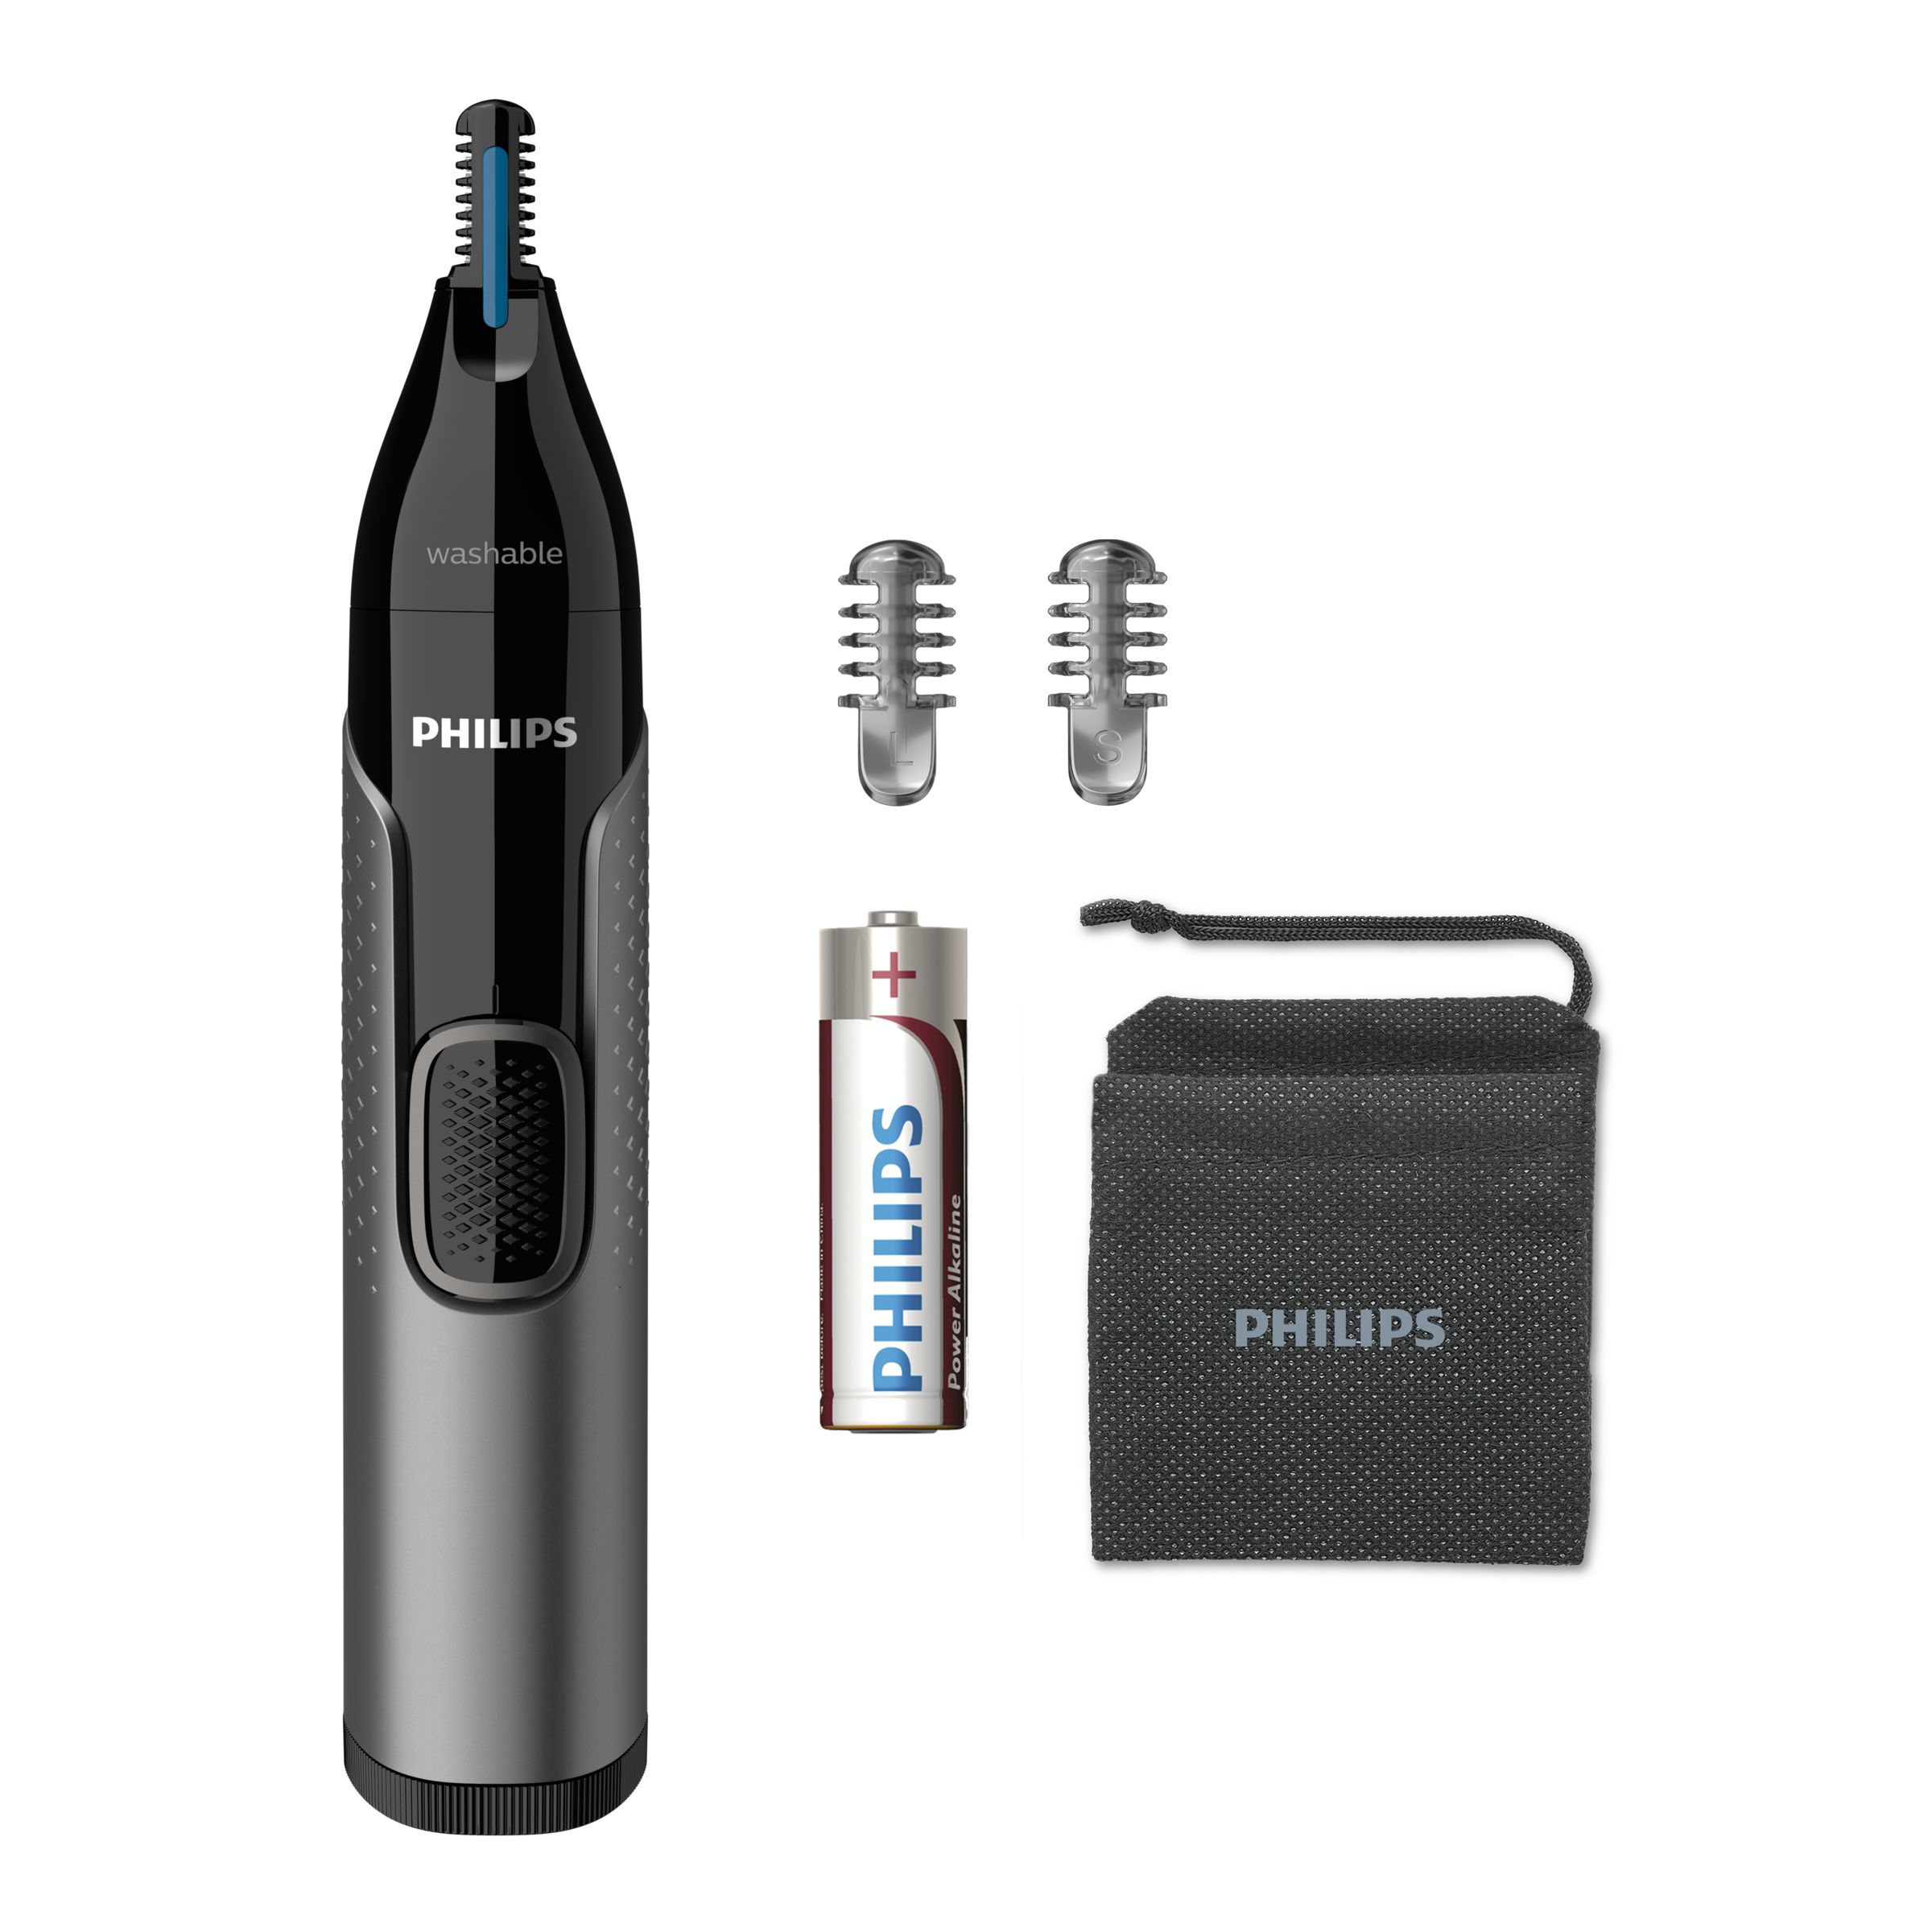 Philips neus- & oortrimmer NT3650/16